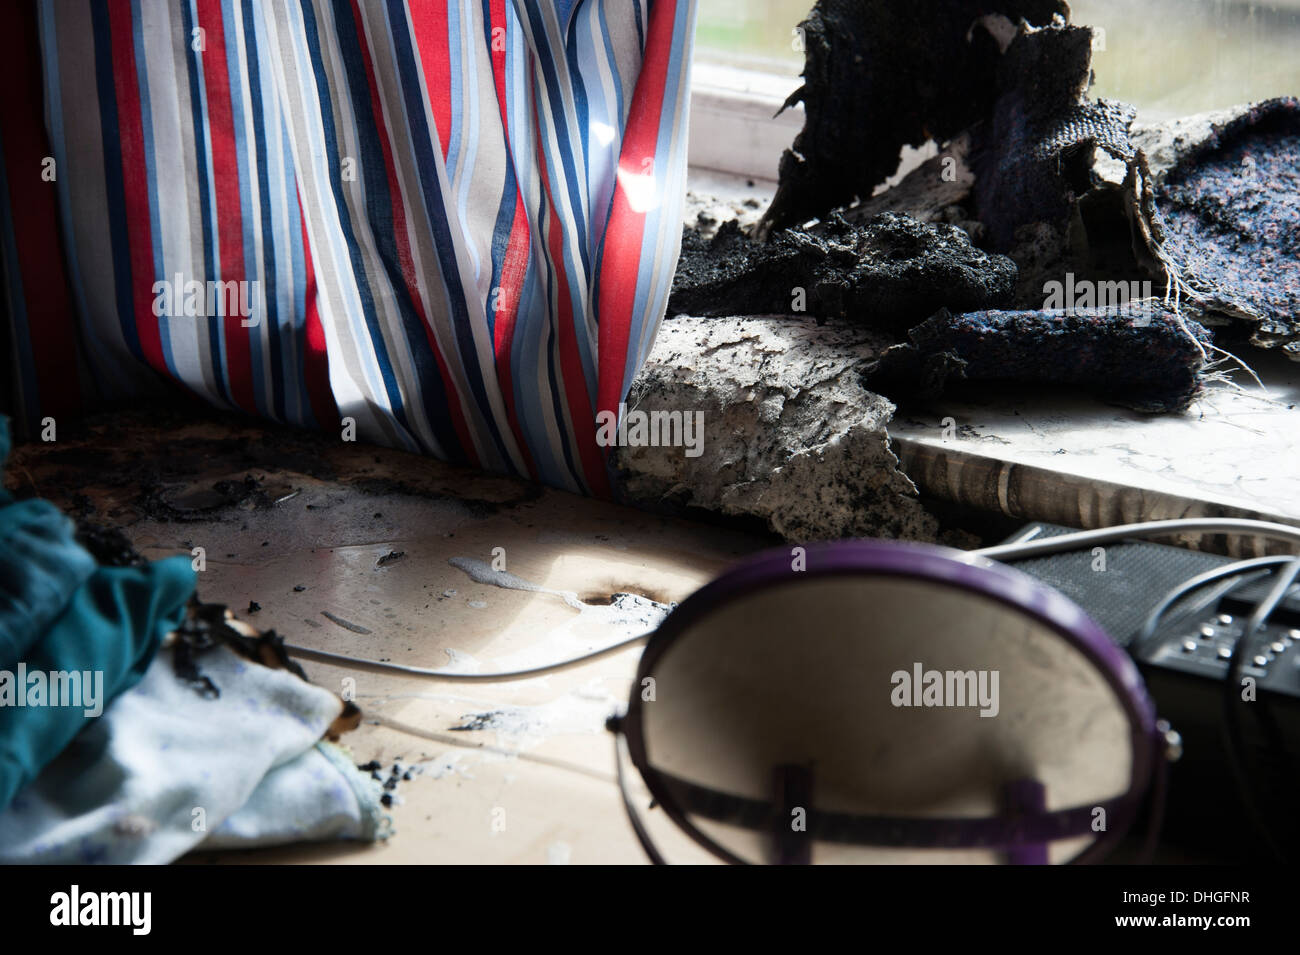 Curtains on fire mirror focus sunlight suns rays accidental real fire Stock Photo